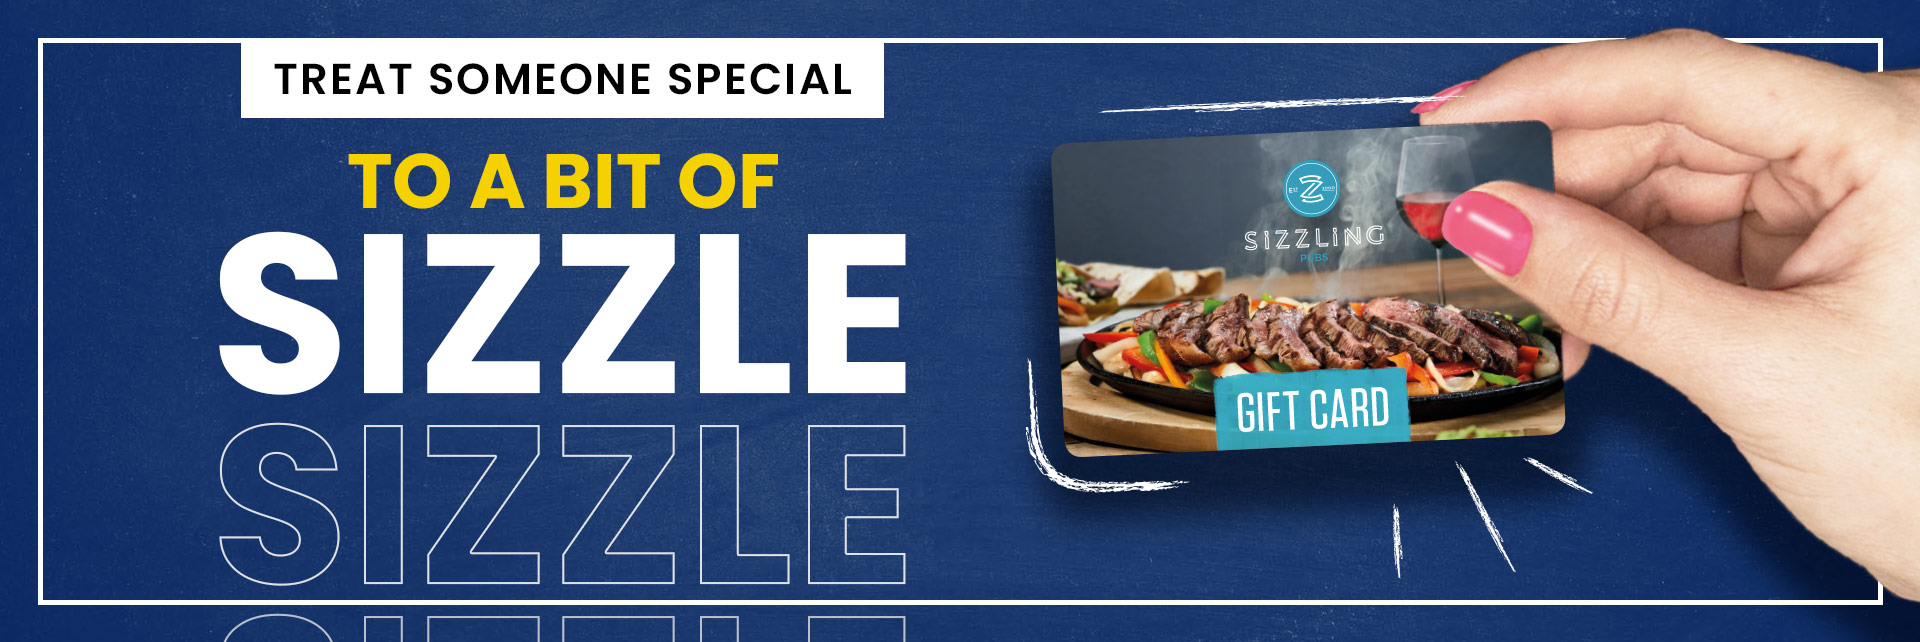 Sizzling Pubs Gift Card at The Southfields in Bolton